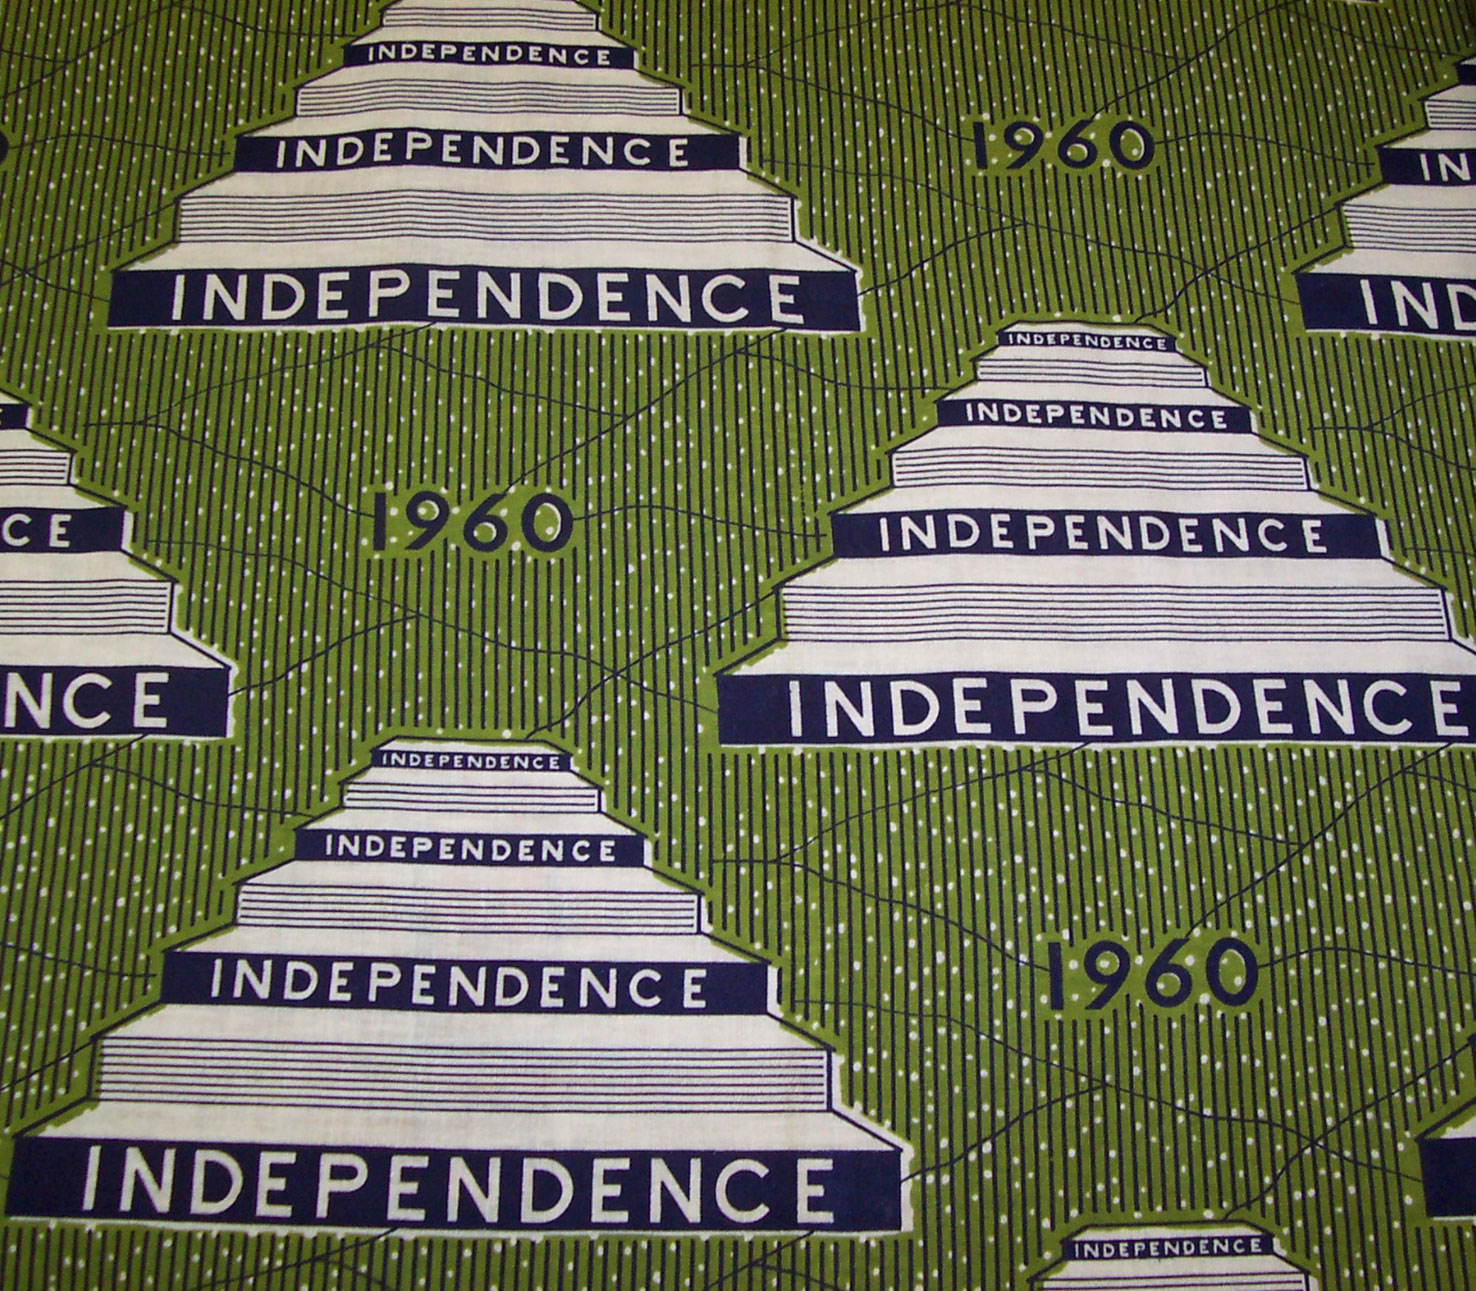 Cotton cloth printed to commemorate Nigerian Independence: Africa, West Africa, Nigeria, 1960.